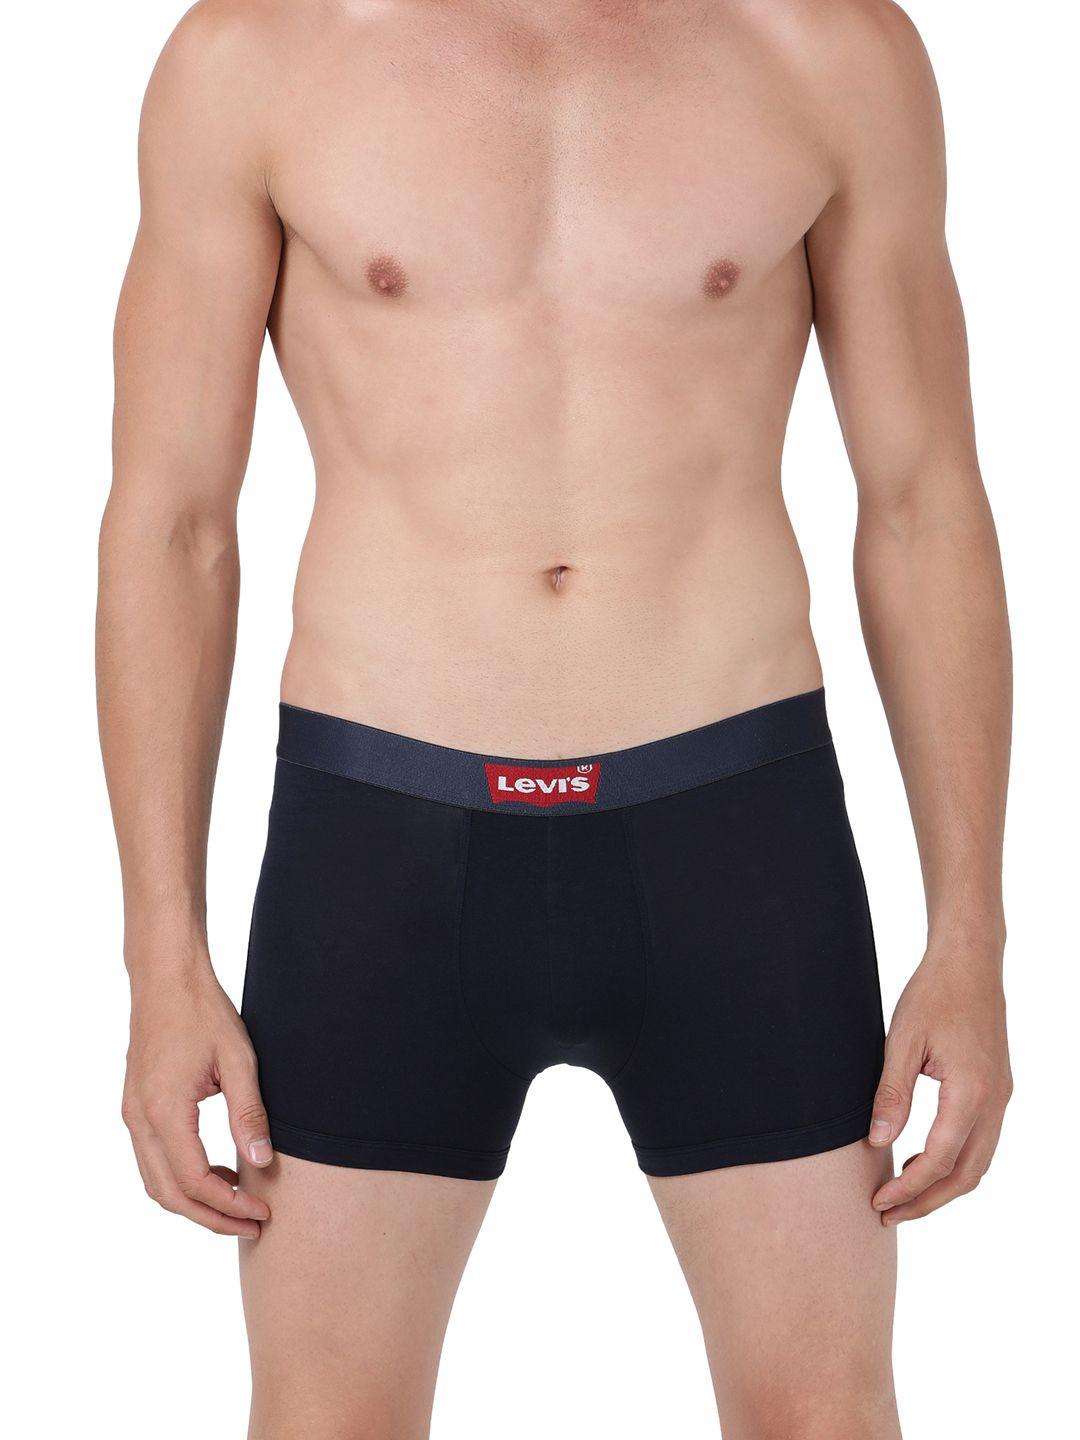 levis men navy blue solid antimicrobial trunks #032-trunk